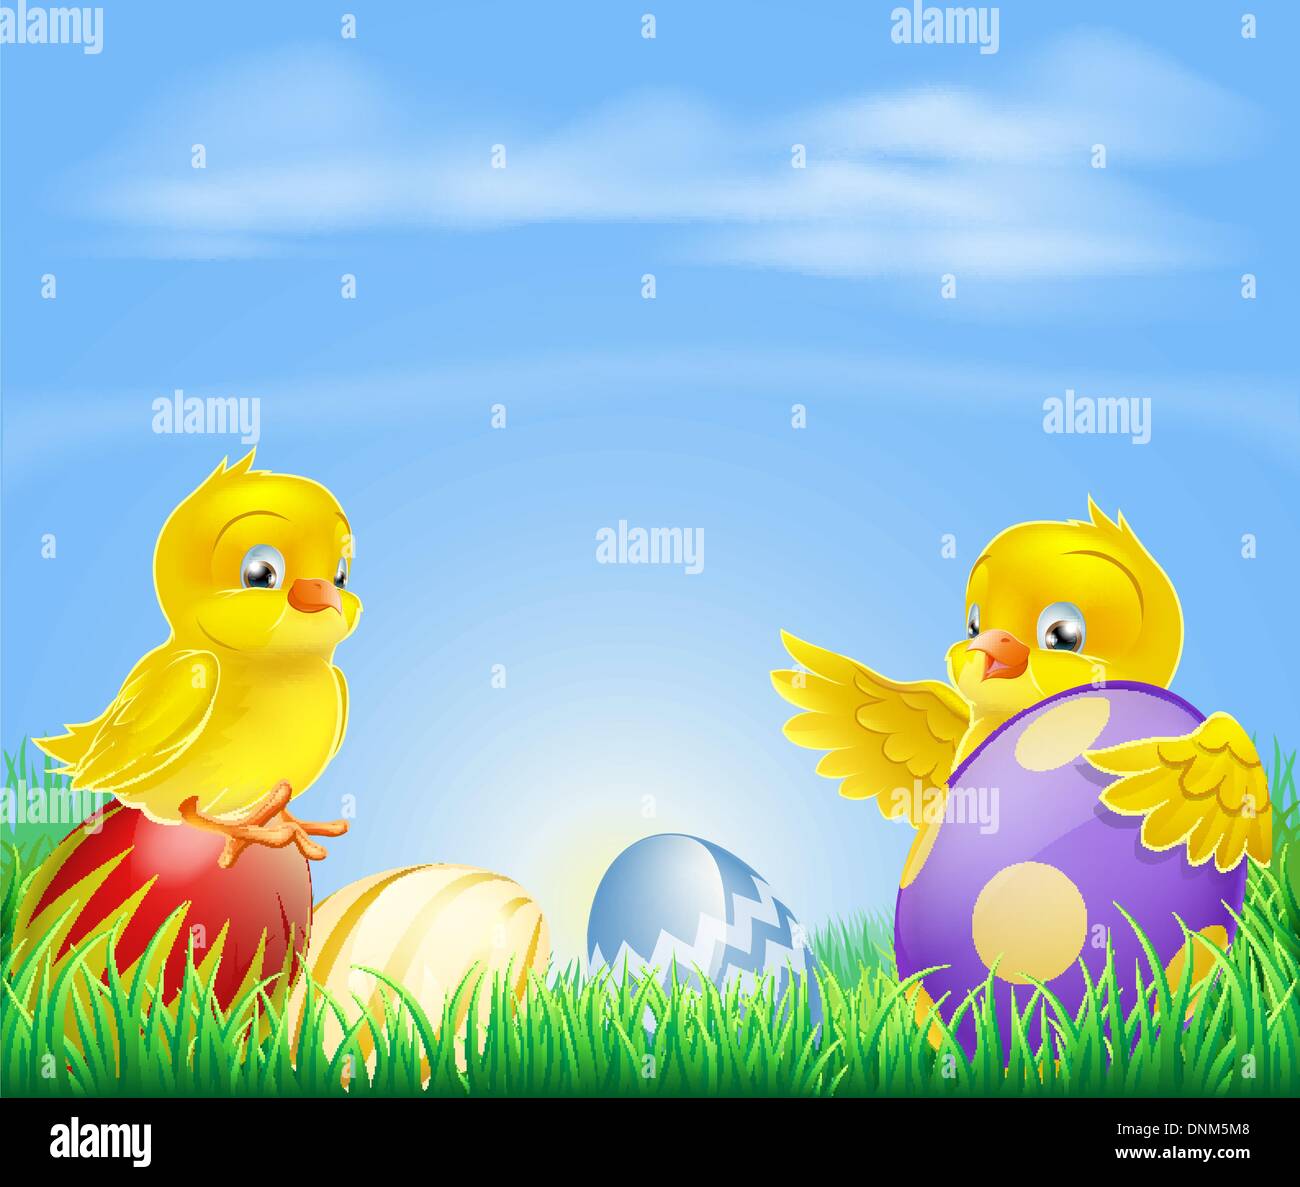 Cute cartoon happy little yellow Easter baby chickens with colorful ...